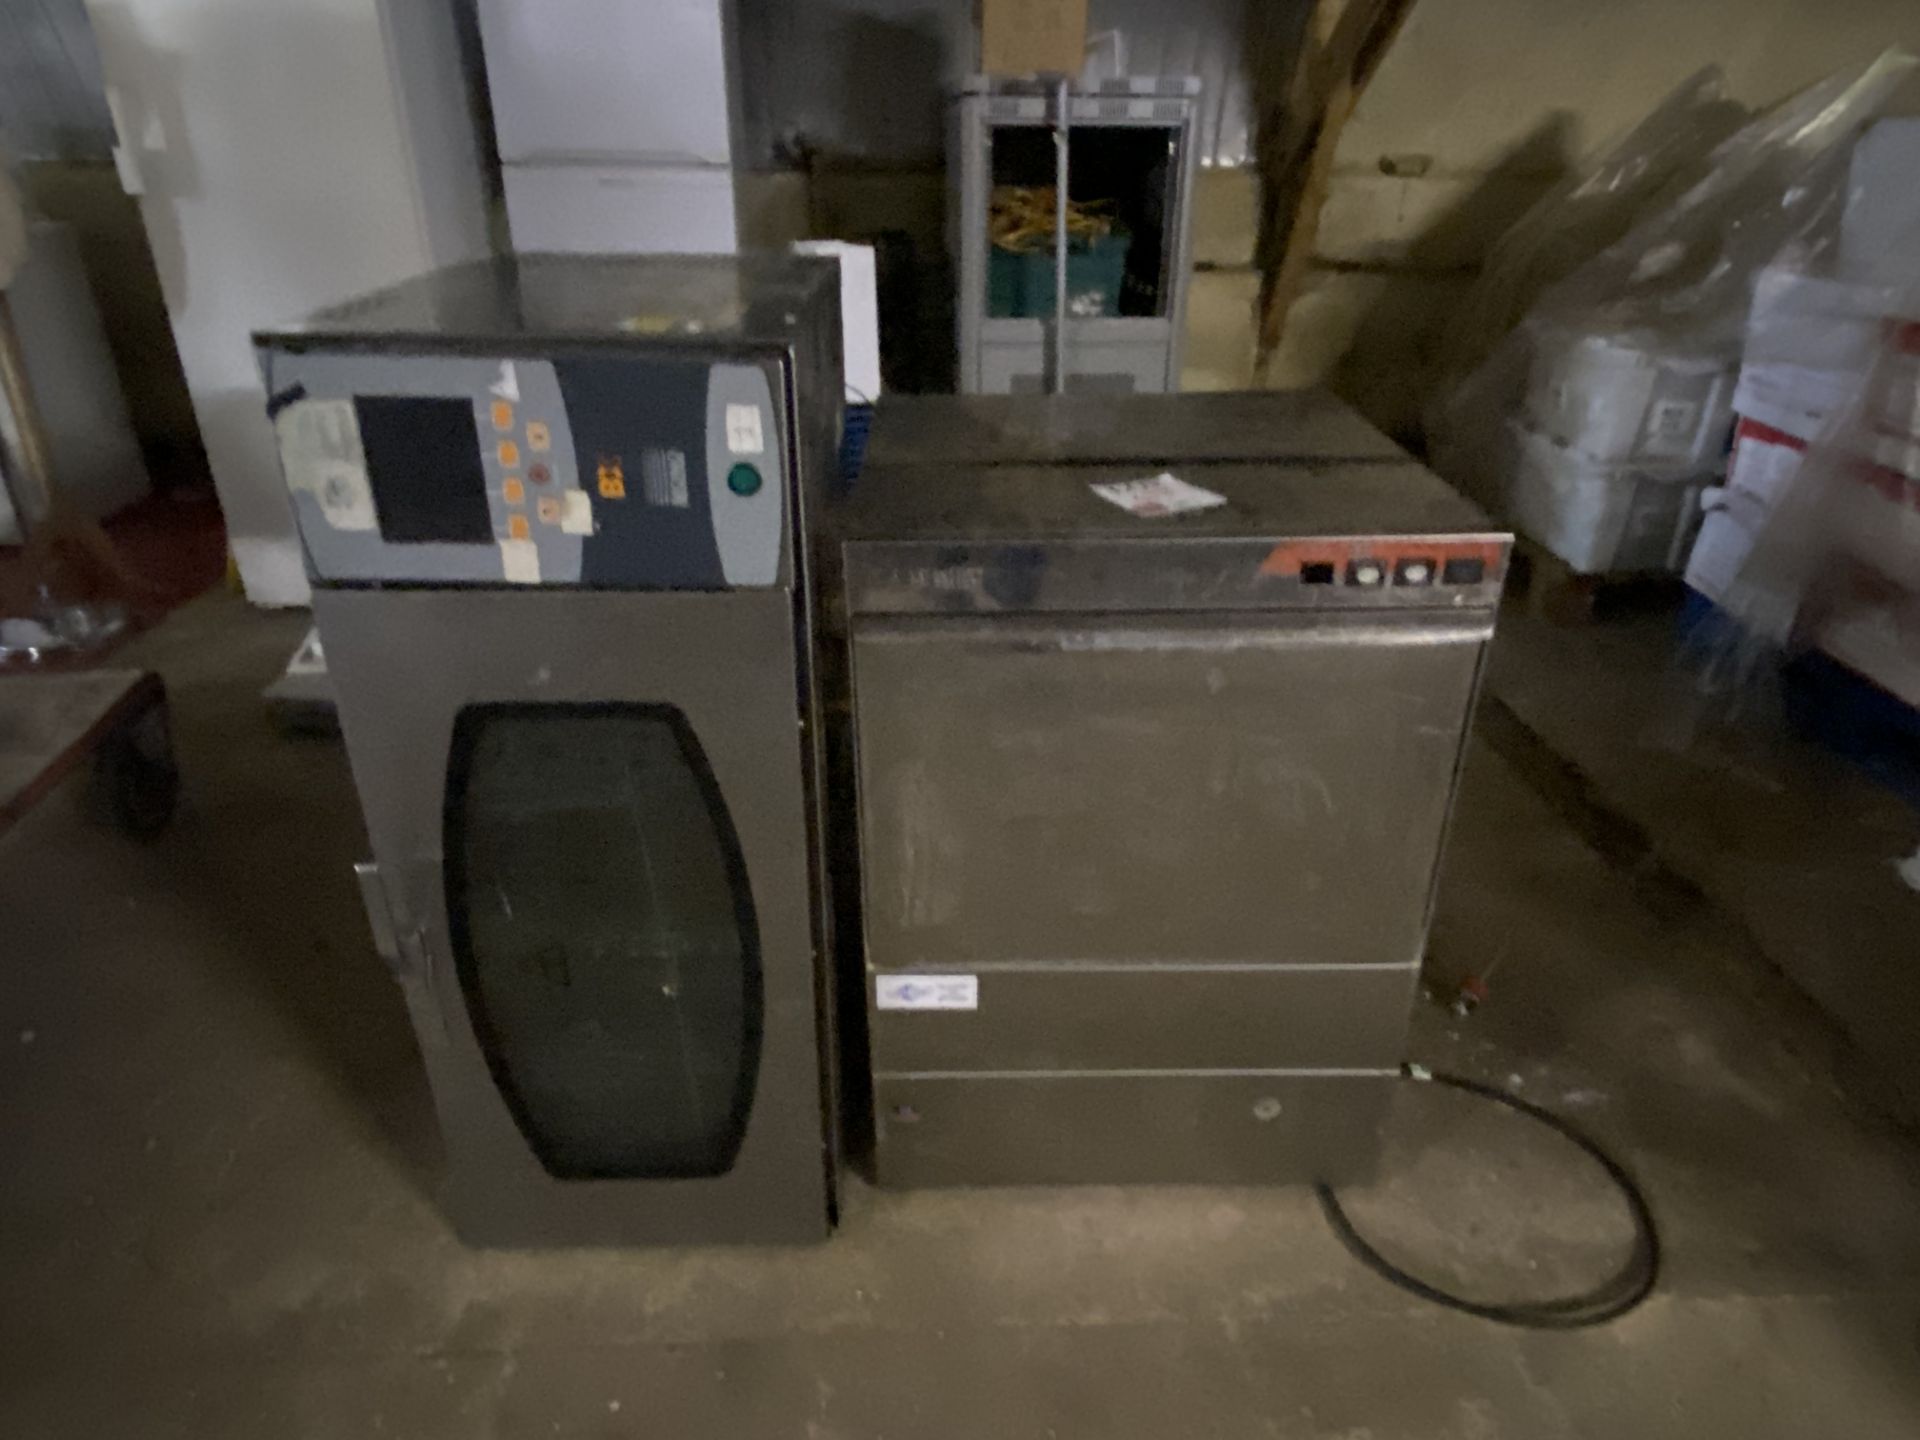 Stainless steel Sammic dishwasher and stainless steel Mono BX oven (working condition unknown)